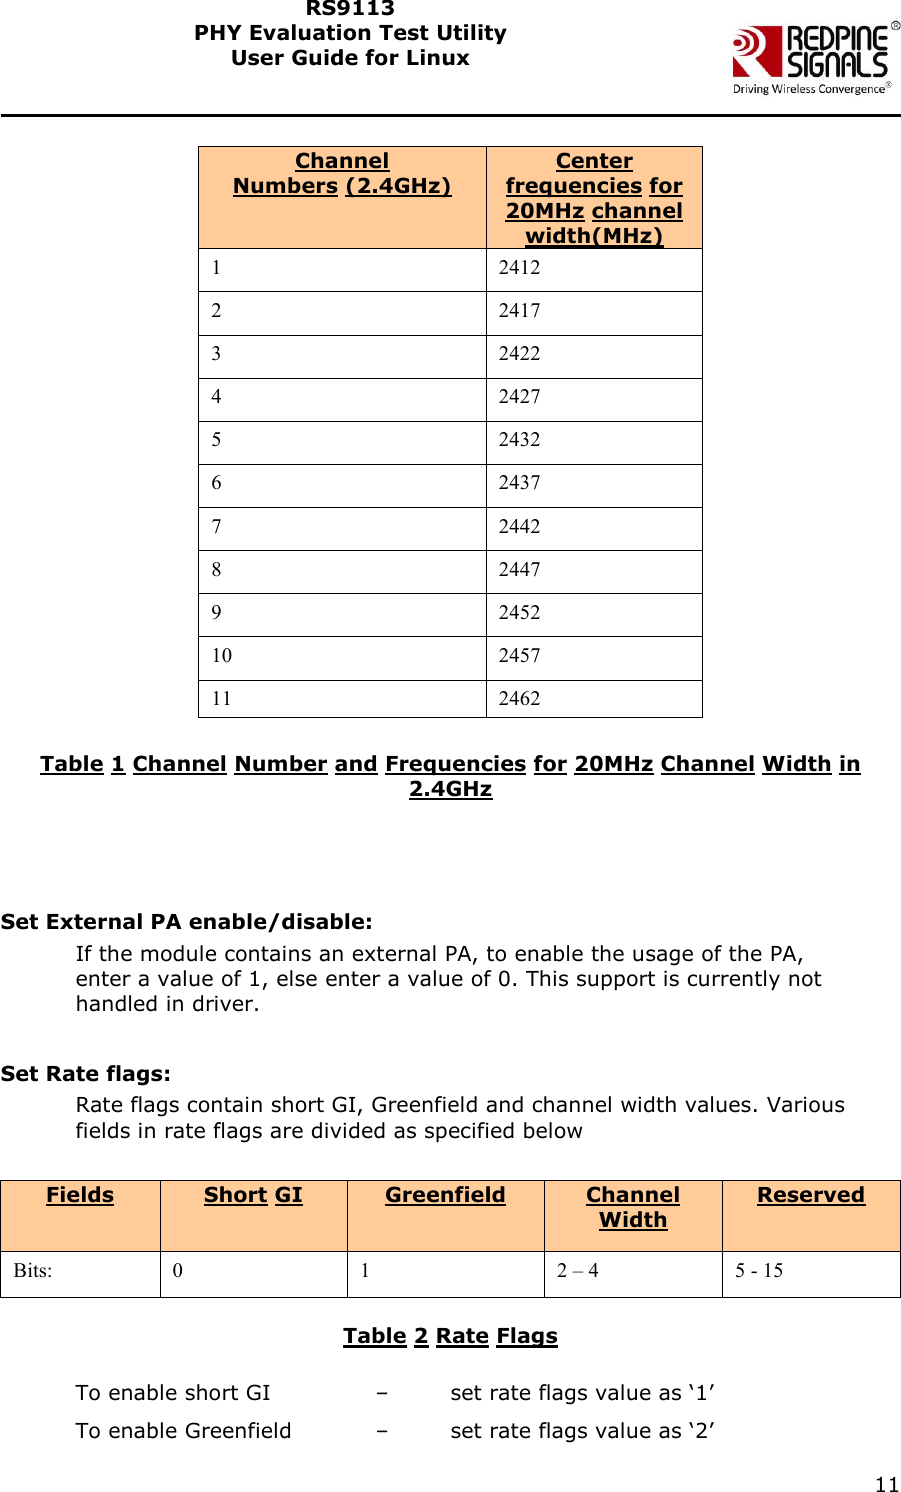    11  RS9113 PHY Evaluation Test Utility  User Guide for Linux                           Table 1 Channel Number and Frequencies for 20MHz Channel Width in 2.4GHz     Set External PA enable/disable: If the module contains an external PA, to enable the usage of the PA, enter a value of 1, else enter a value of 0. This support is currently not handled in driver.  Set Rate flags: Rate flags contain short GI, Greenfield and channel width values. Various fields in rate flags are divided as specified below  Fields Short GI Greenfield Channel Width Reserved Bits: 0 1 2 – 4 5 - 15  Table 2 Rate Flags  To enable short GI     –   set rate flags value as ‘1’ To enable Greenfield    –   set rate flags value as ‘2’ Channel Numbers (2.4GHz) Center frequencies for 20MHz channel width(MHz) 1 2412 2 2417 3 2422 4 2427 5 2432 6 2437 7 2442 8 2447 9 2452 10 2457 11 2462 